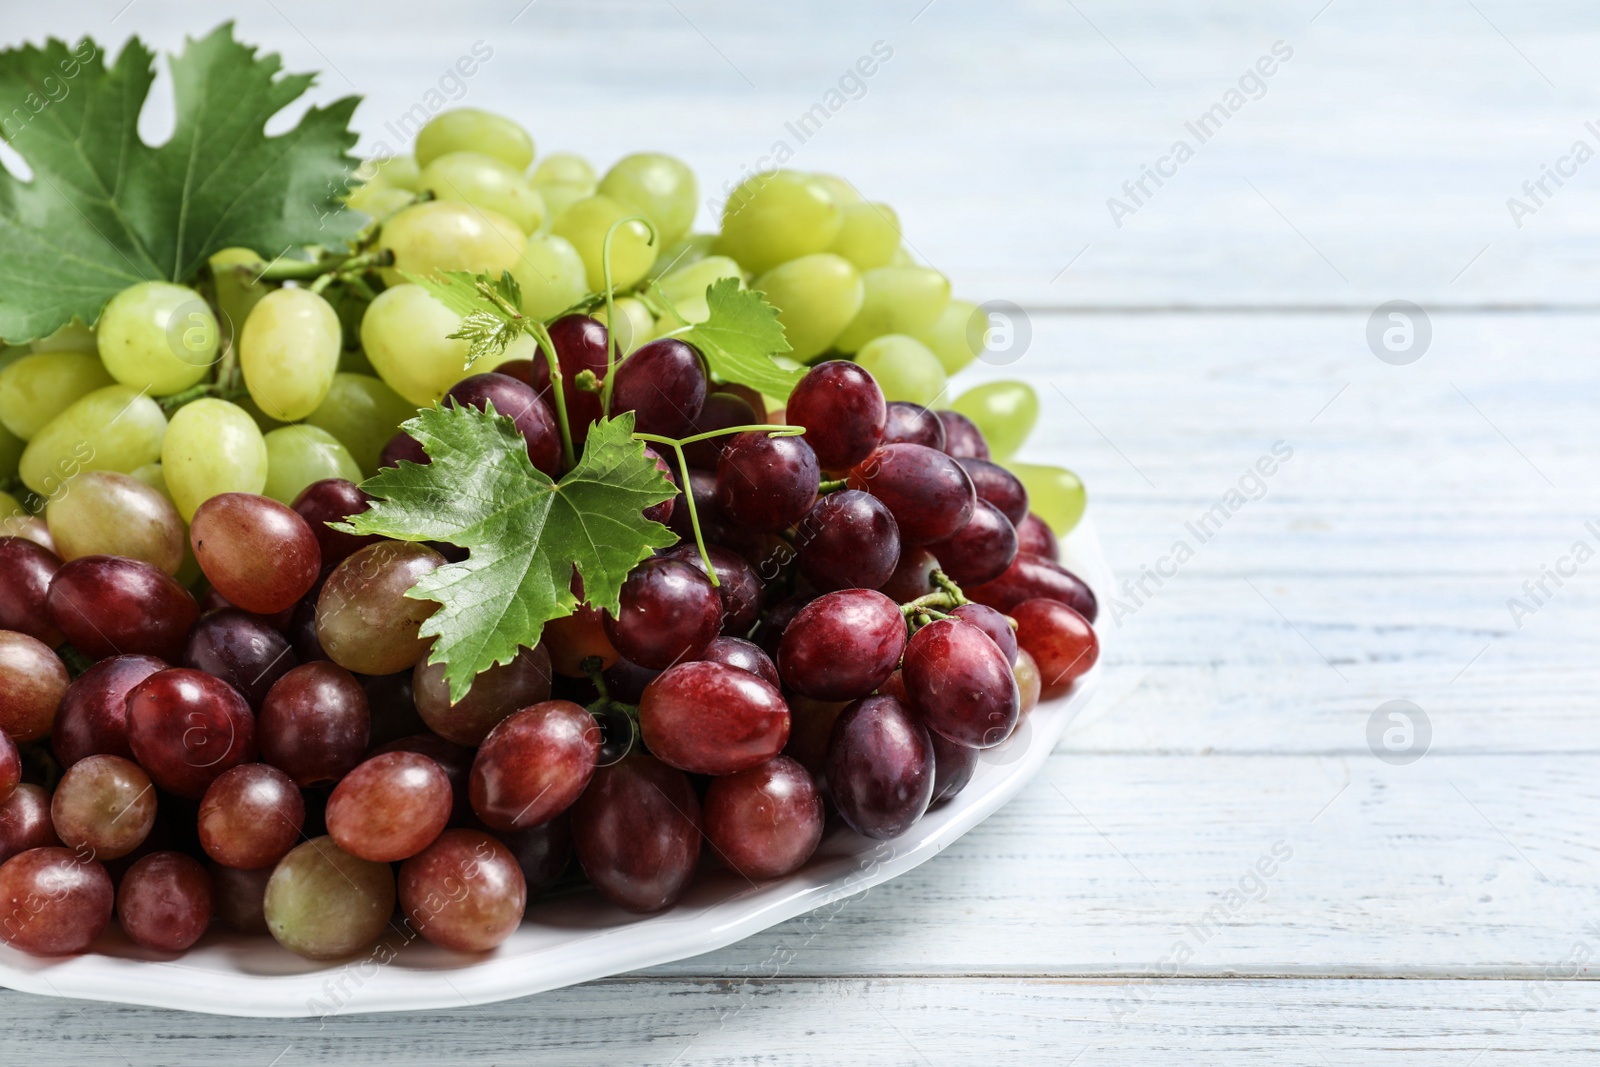 Photo of Fresh ripe juicy grapes on white wooden table